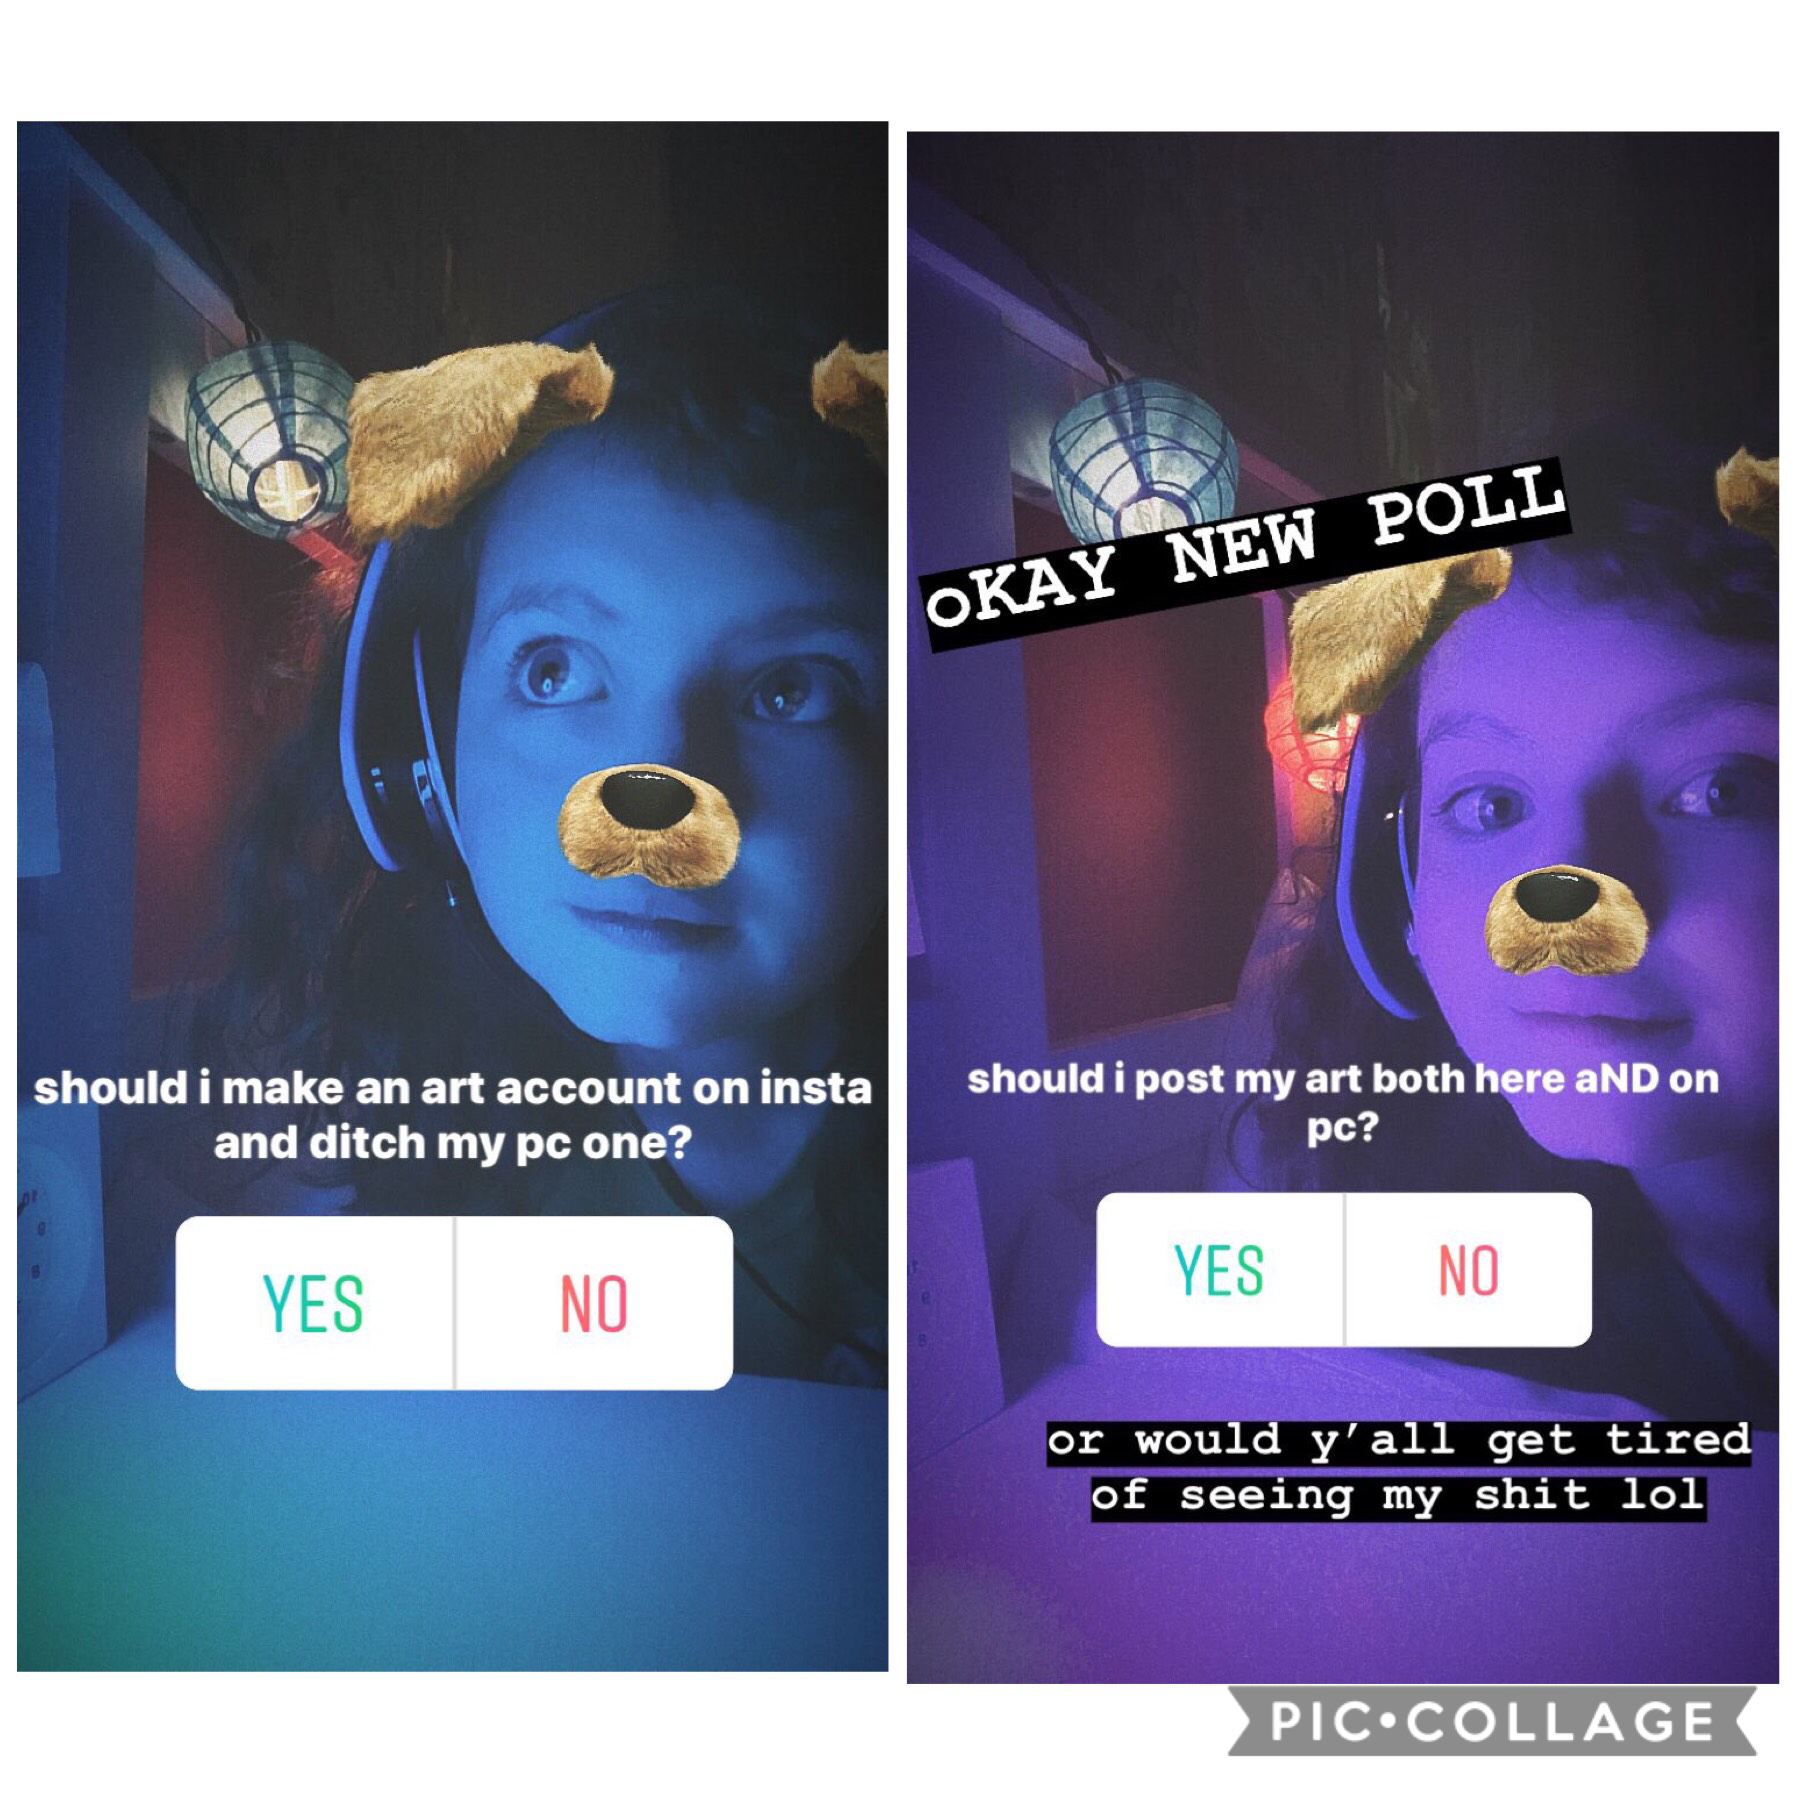 cHECK OUT MY POLLS ON INSTA OR VOTE IN THE COMMENTS IF YOU DONT HAVE INSTA THIS IS IMPORTANT I NEED HELP LOL